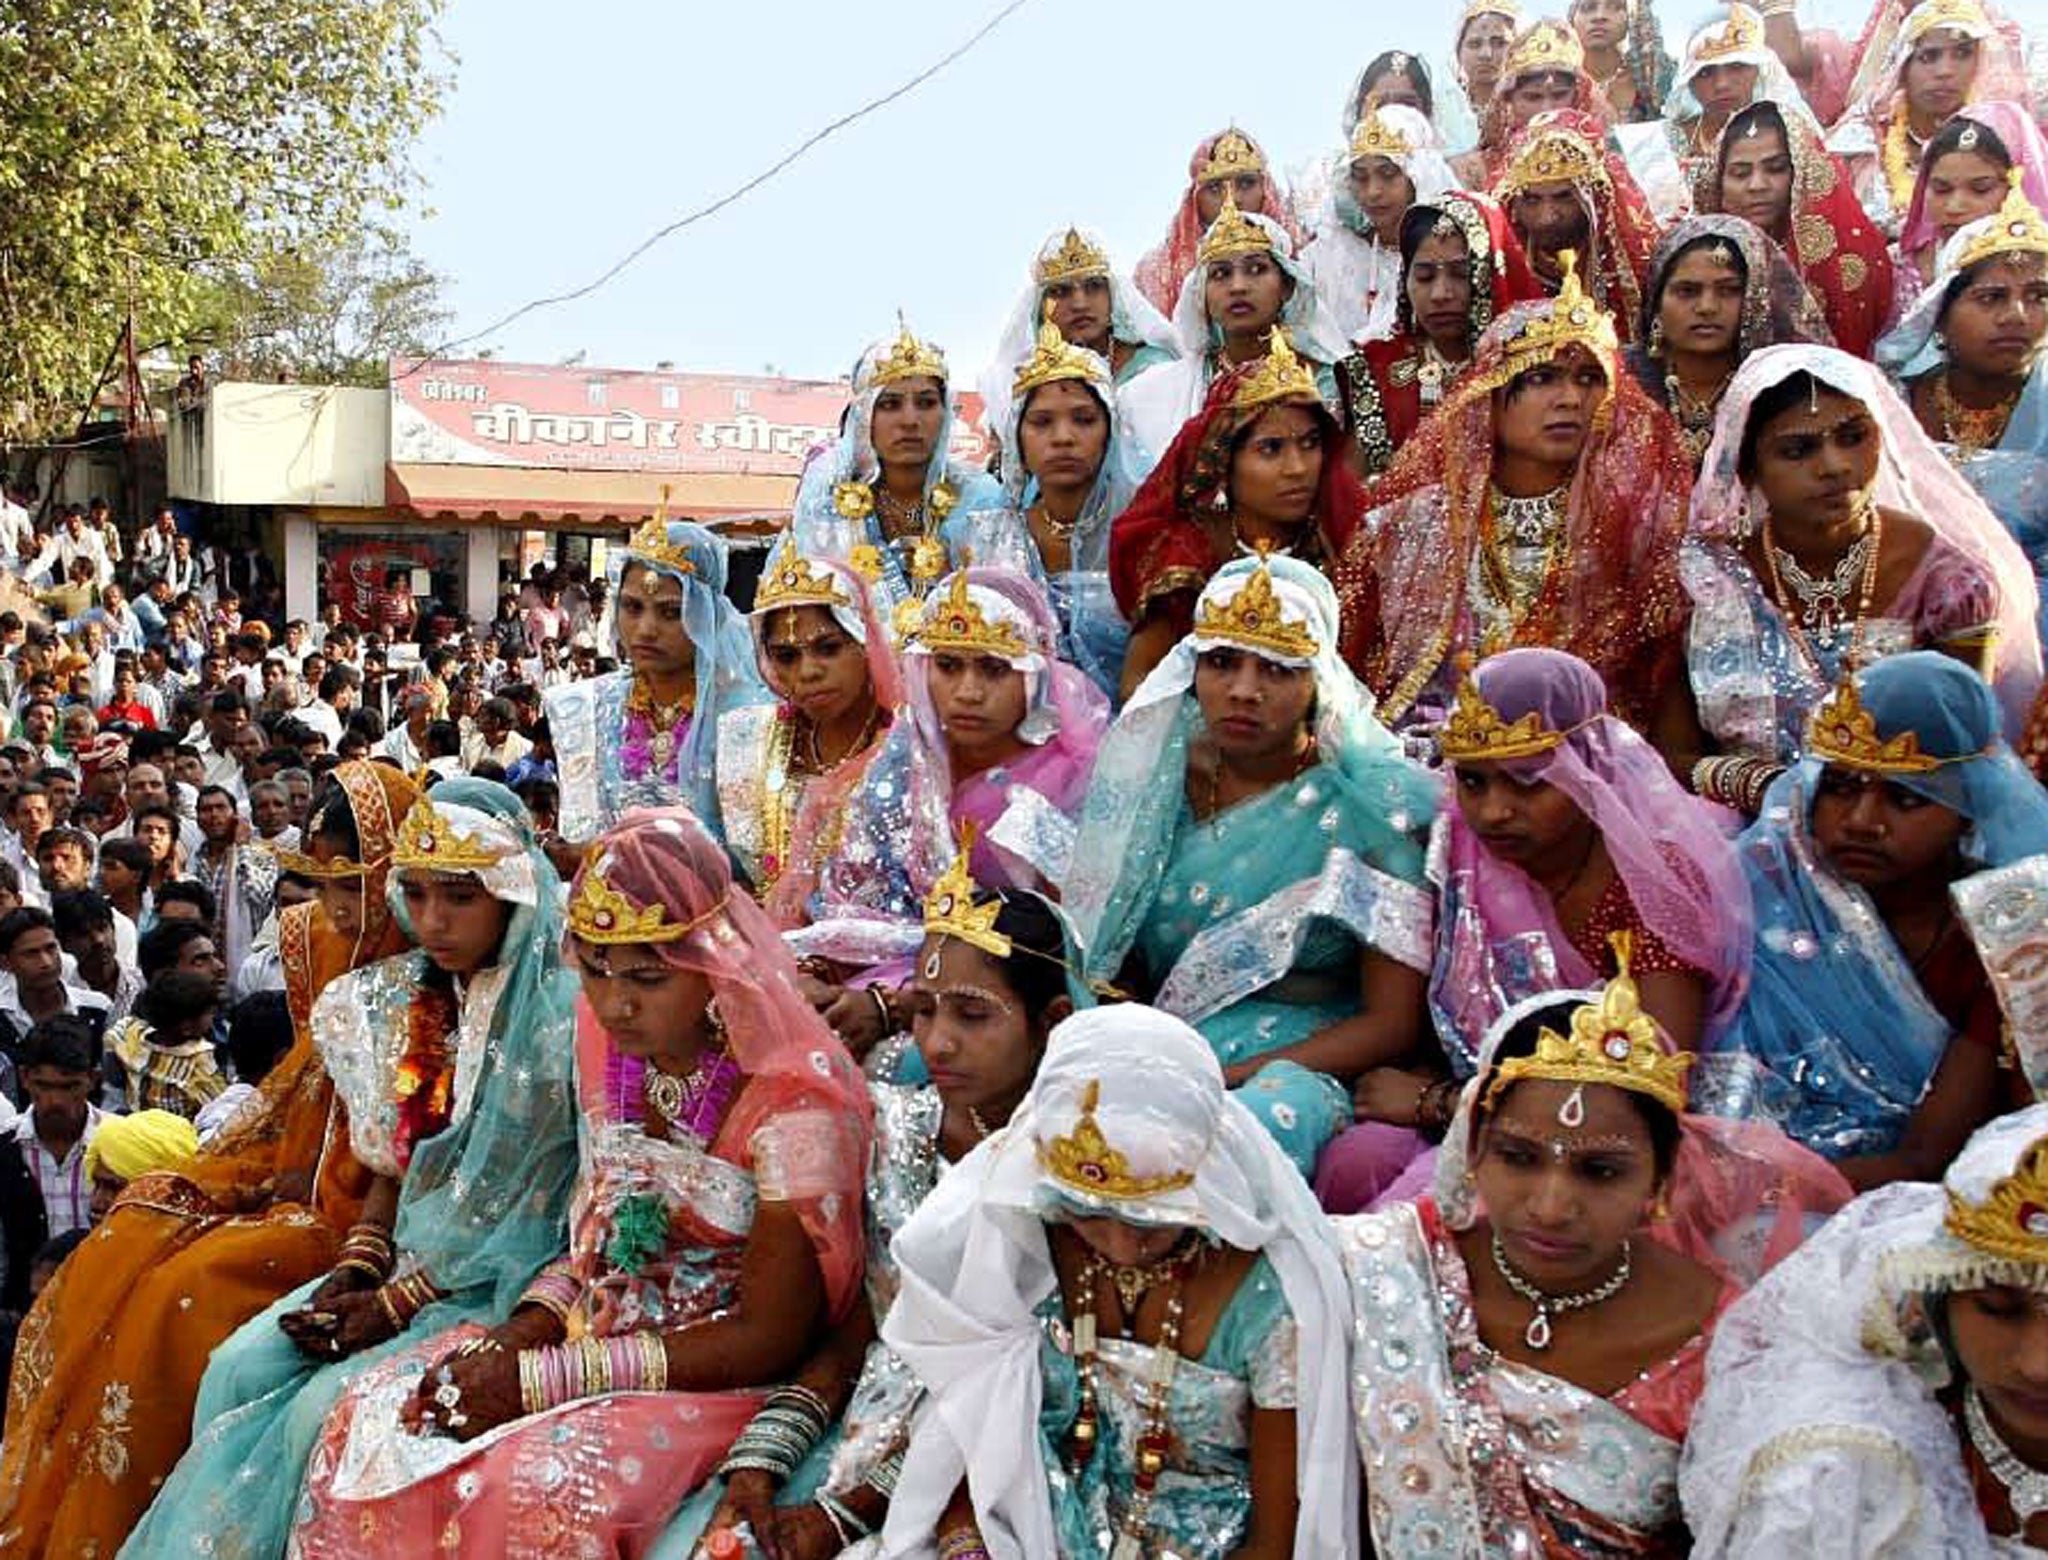 Brides in Bhopal, taking part in a mass marriage ceremony last May, on what is deemed to be the year’s most auspicious day to wed